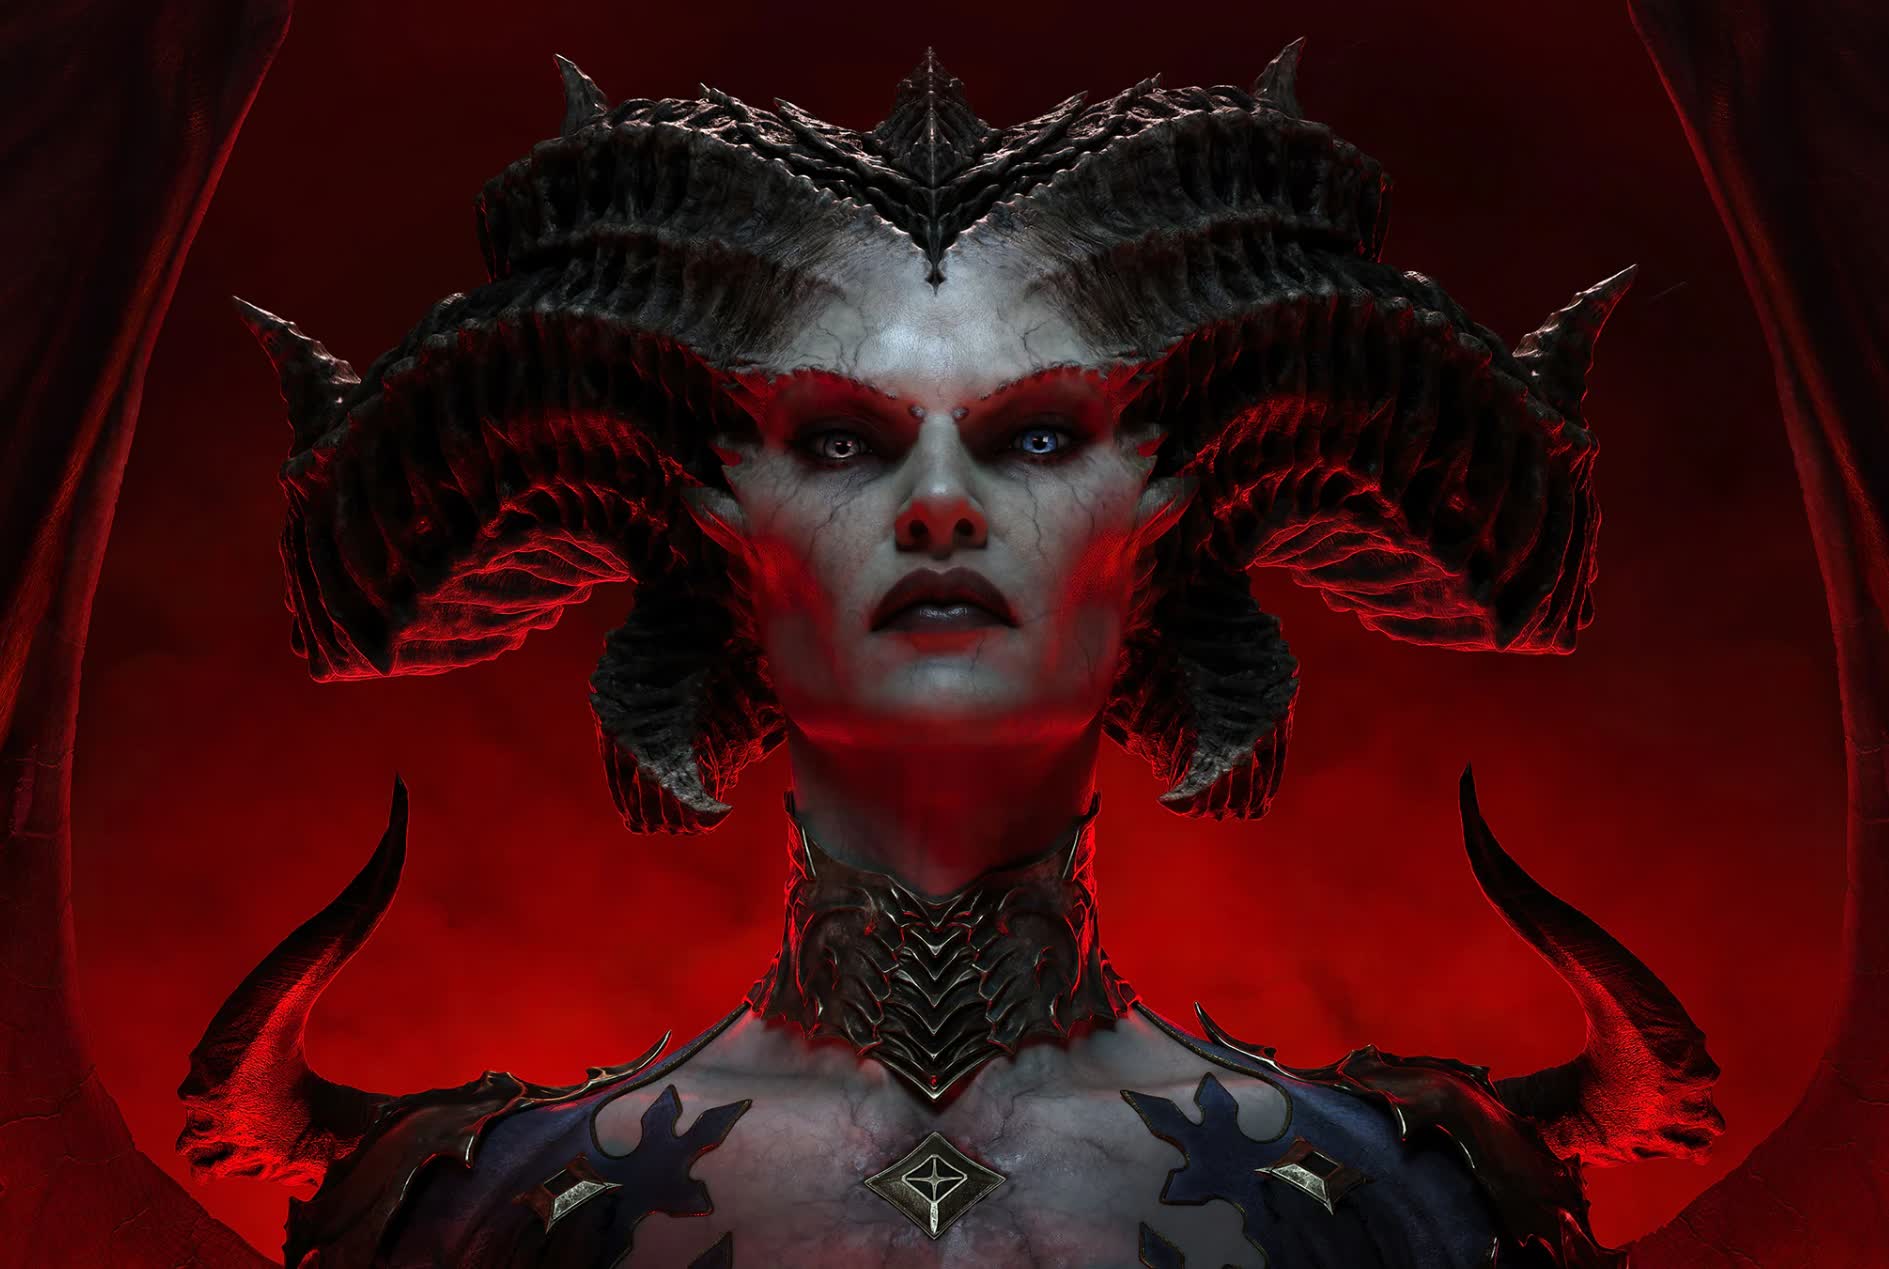 Blizzard shares Diablo IV opening cinematic and open beta details